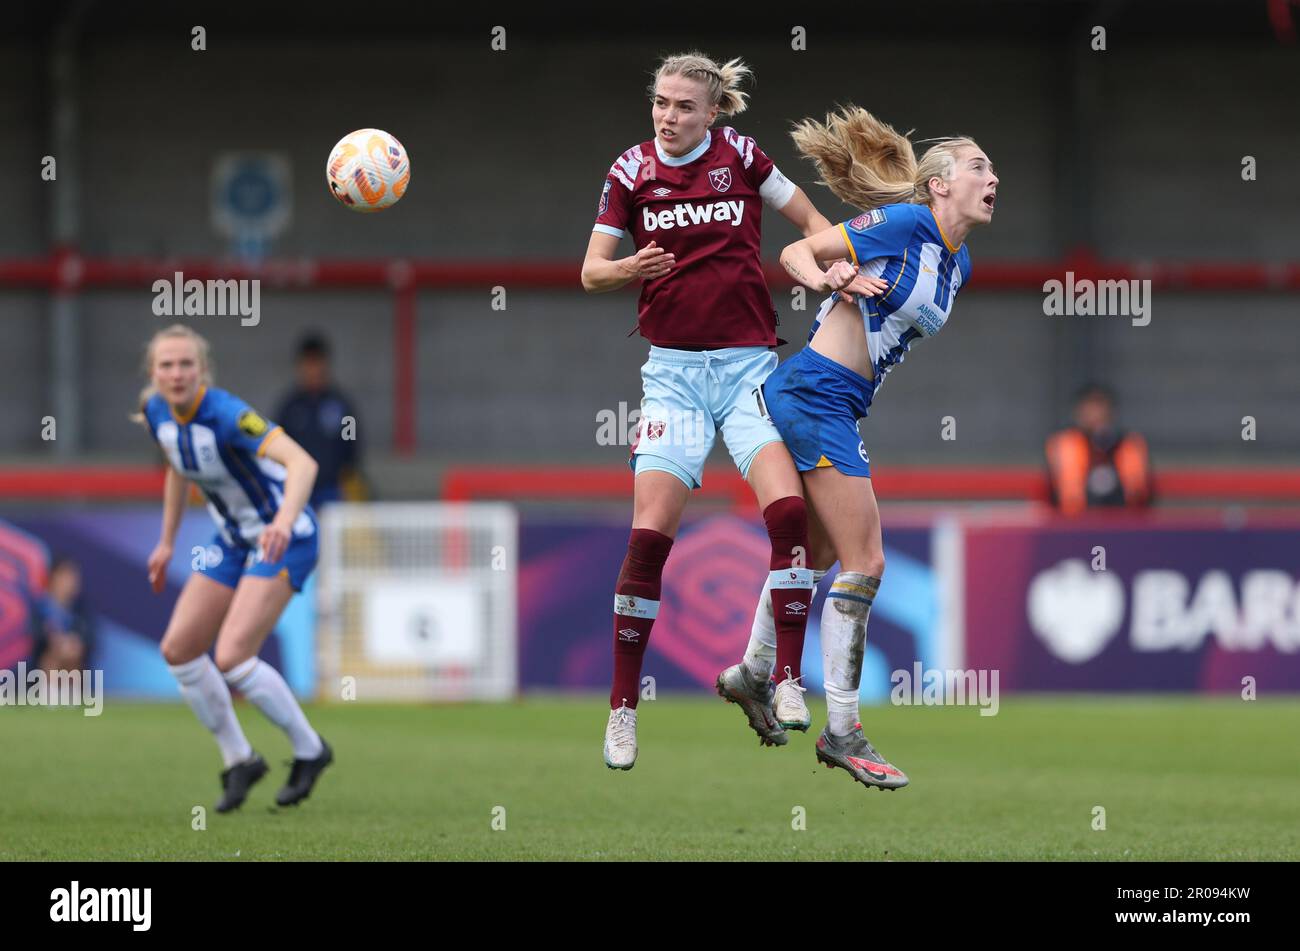 Crawley, UK. 7th May, 2023. West Ham's Dagny Brynjarsdottir challenges Brighton's Megan Connolly during the Barclays Women's Super League match between Brighton & Hove Albion and West Ham United at the Broadfield Stadium in Crawley. Credit: James Boardman/Alamy Live News Stock Photo